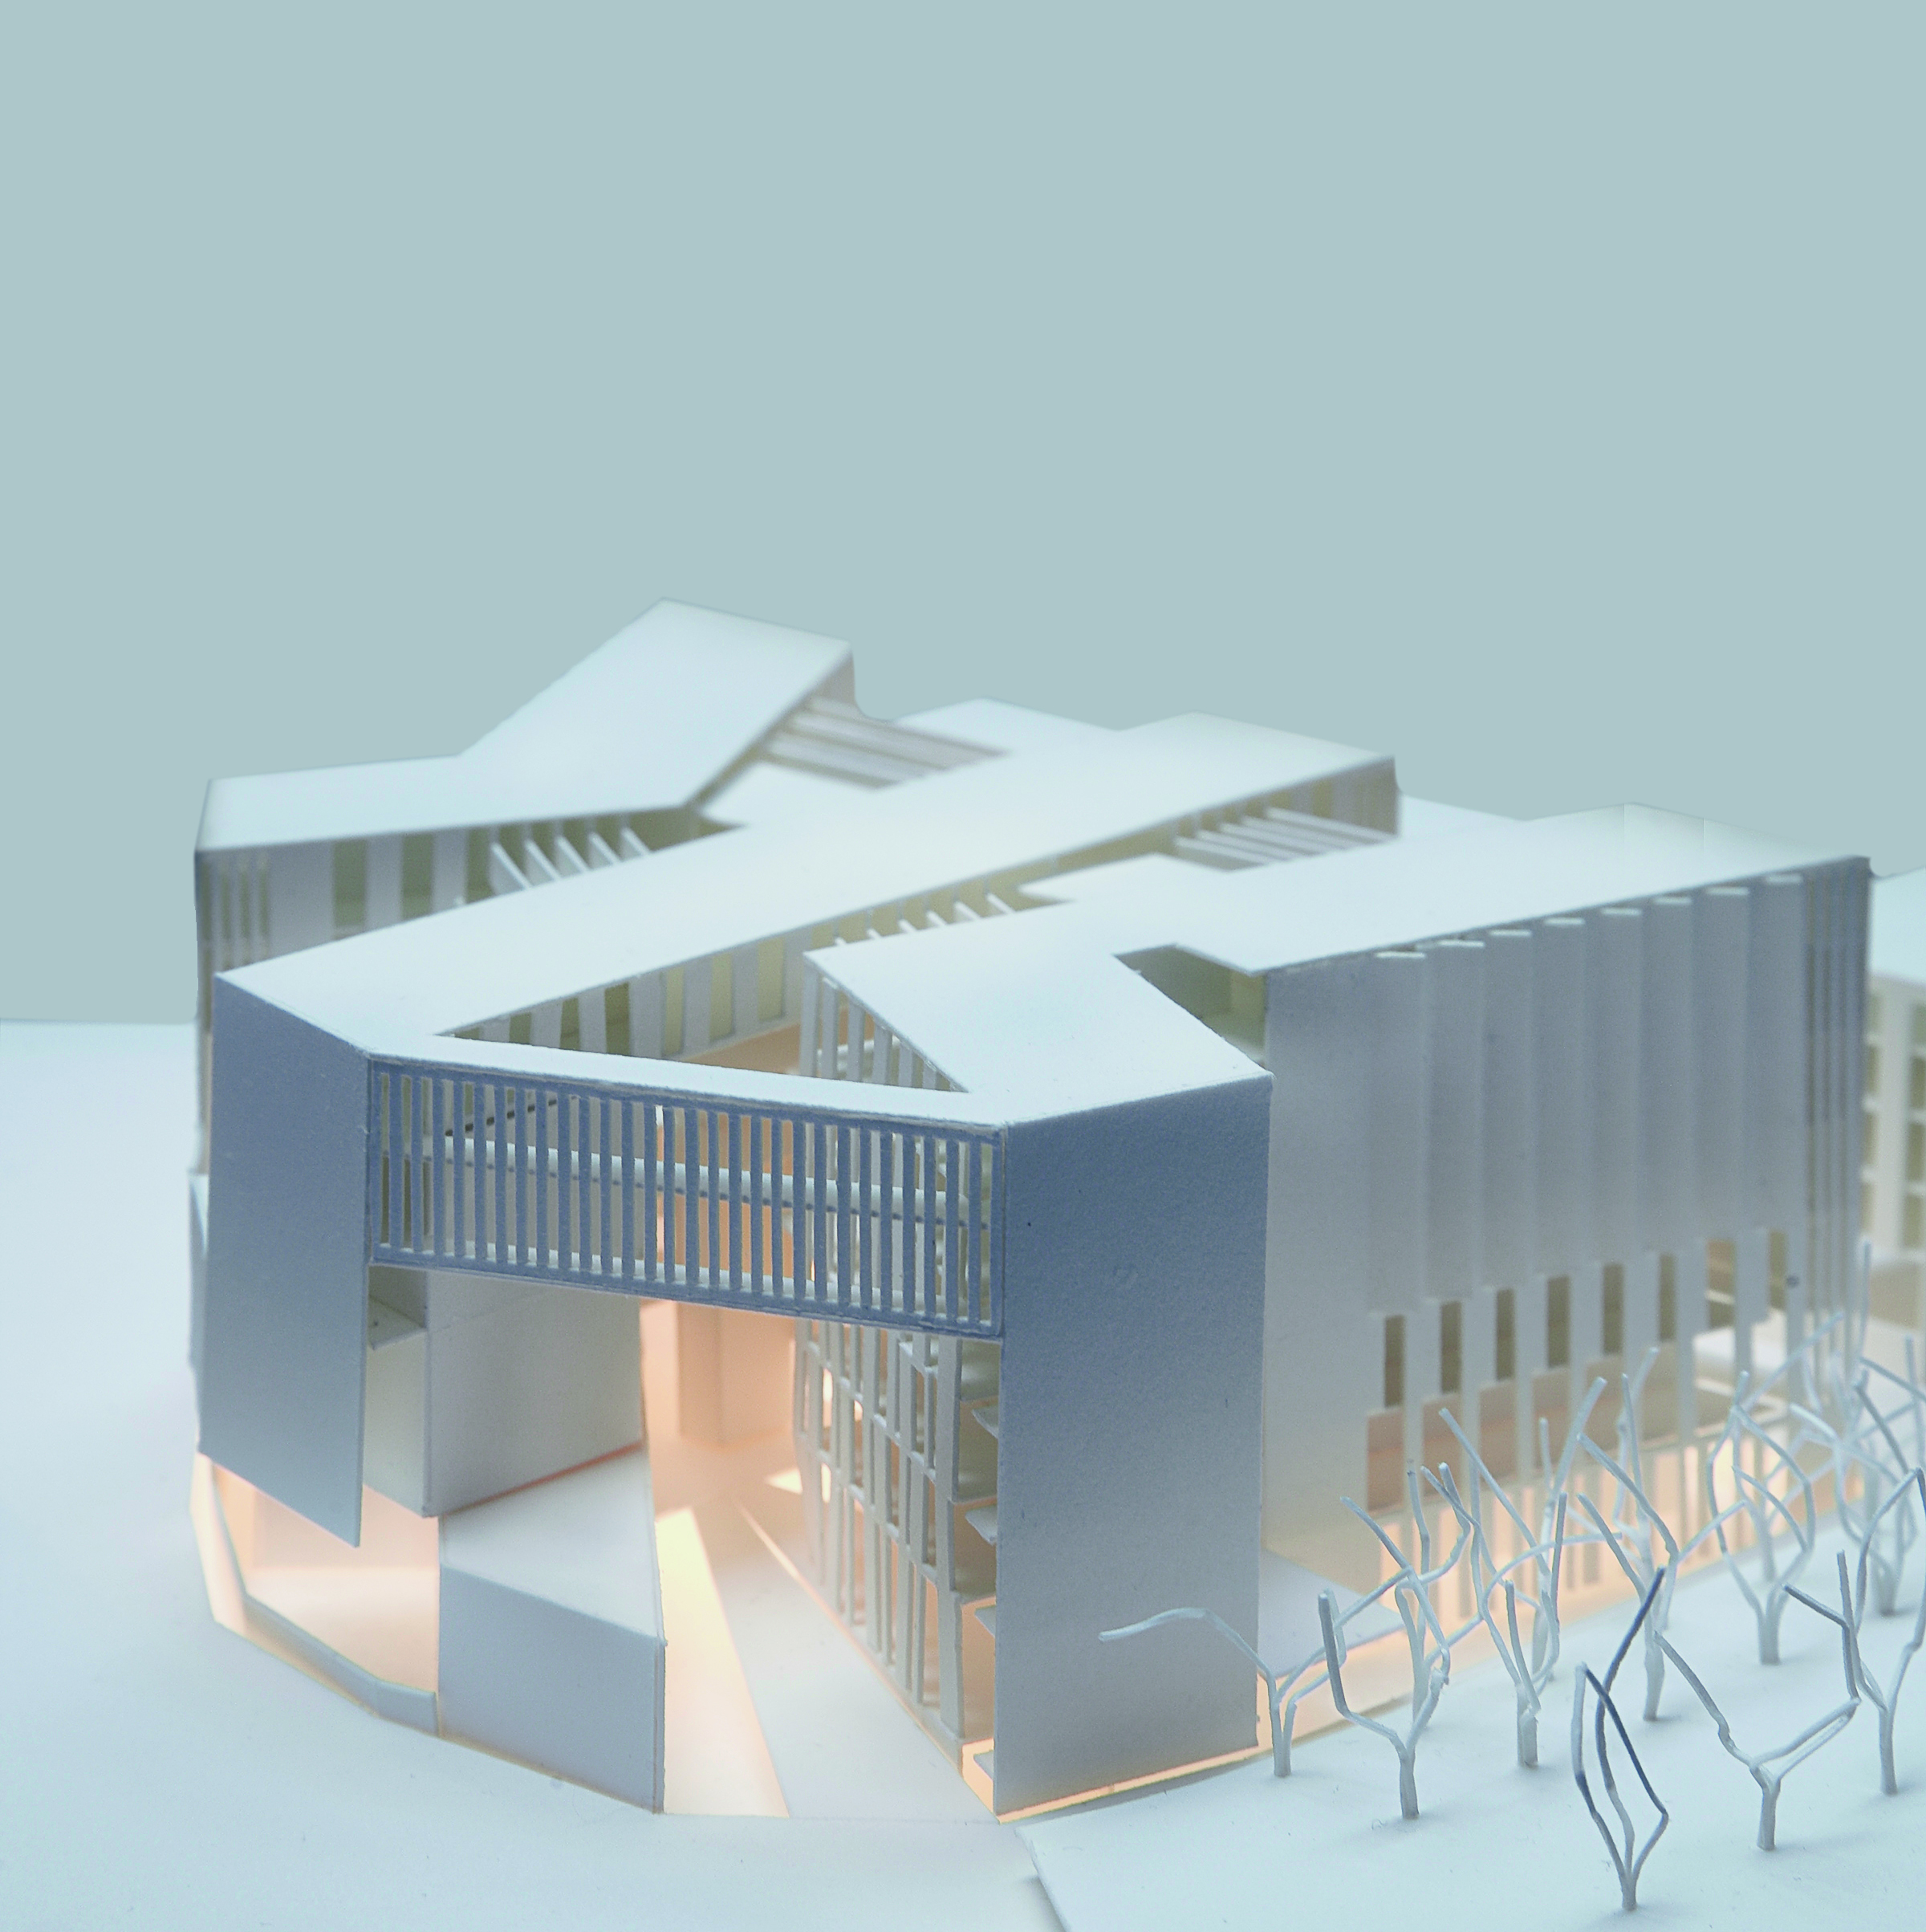 A model for a new School of Economics for the University of Toulouse 1 Capitole, by Grafton Architects